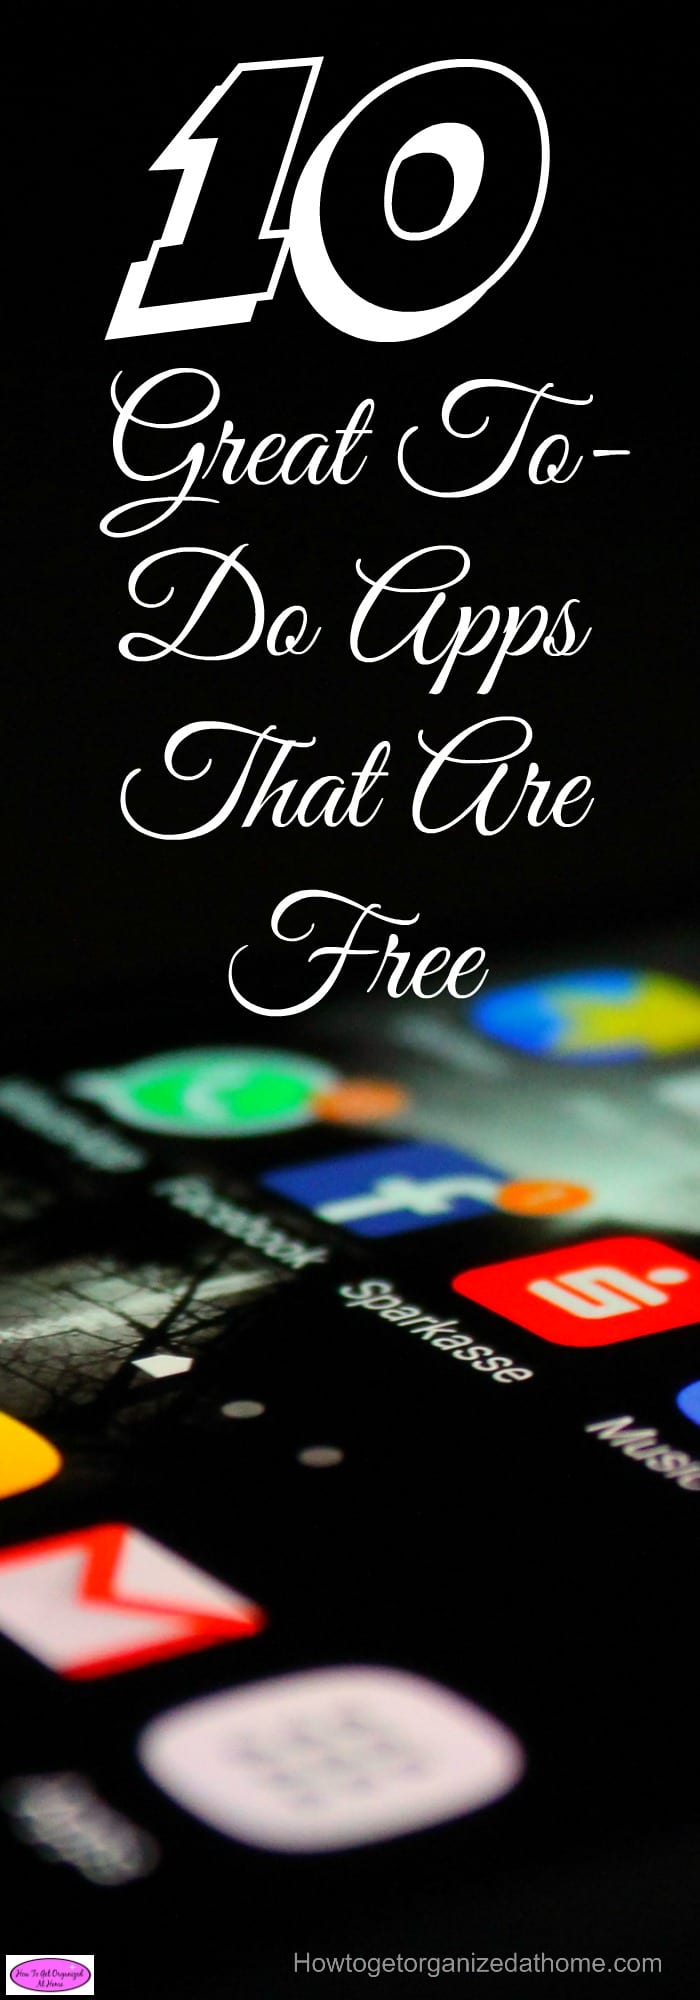 These 10 great to-do apps that are free to use and download are great, it depends on what you are looking for in a to-do app!